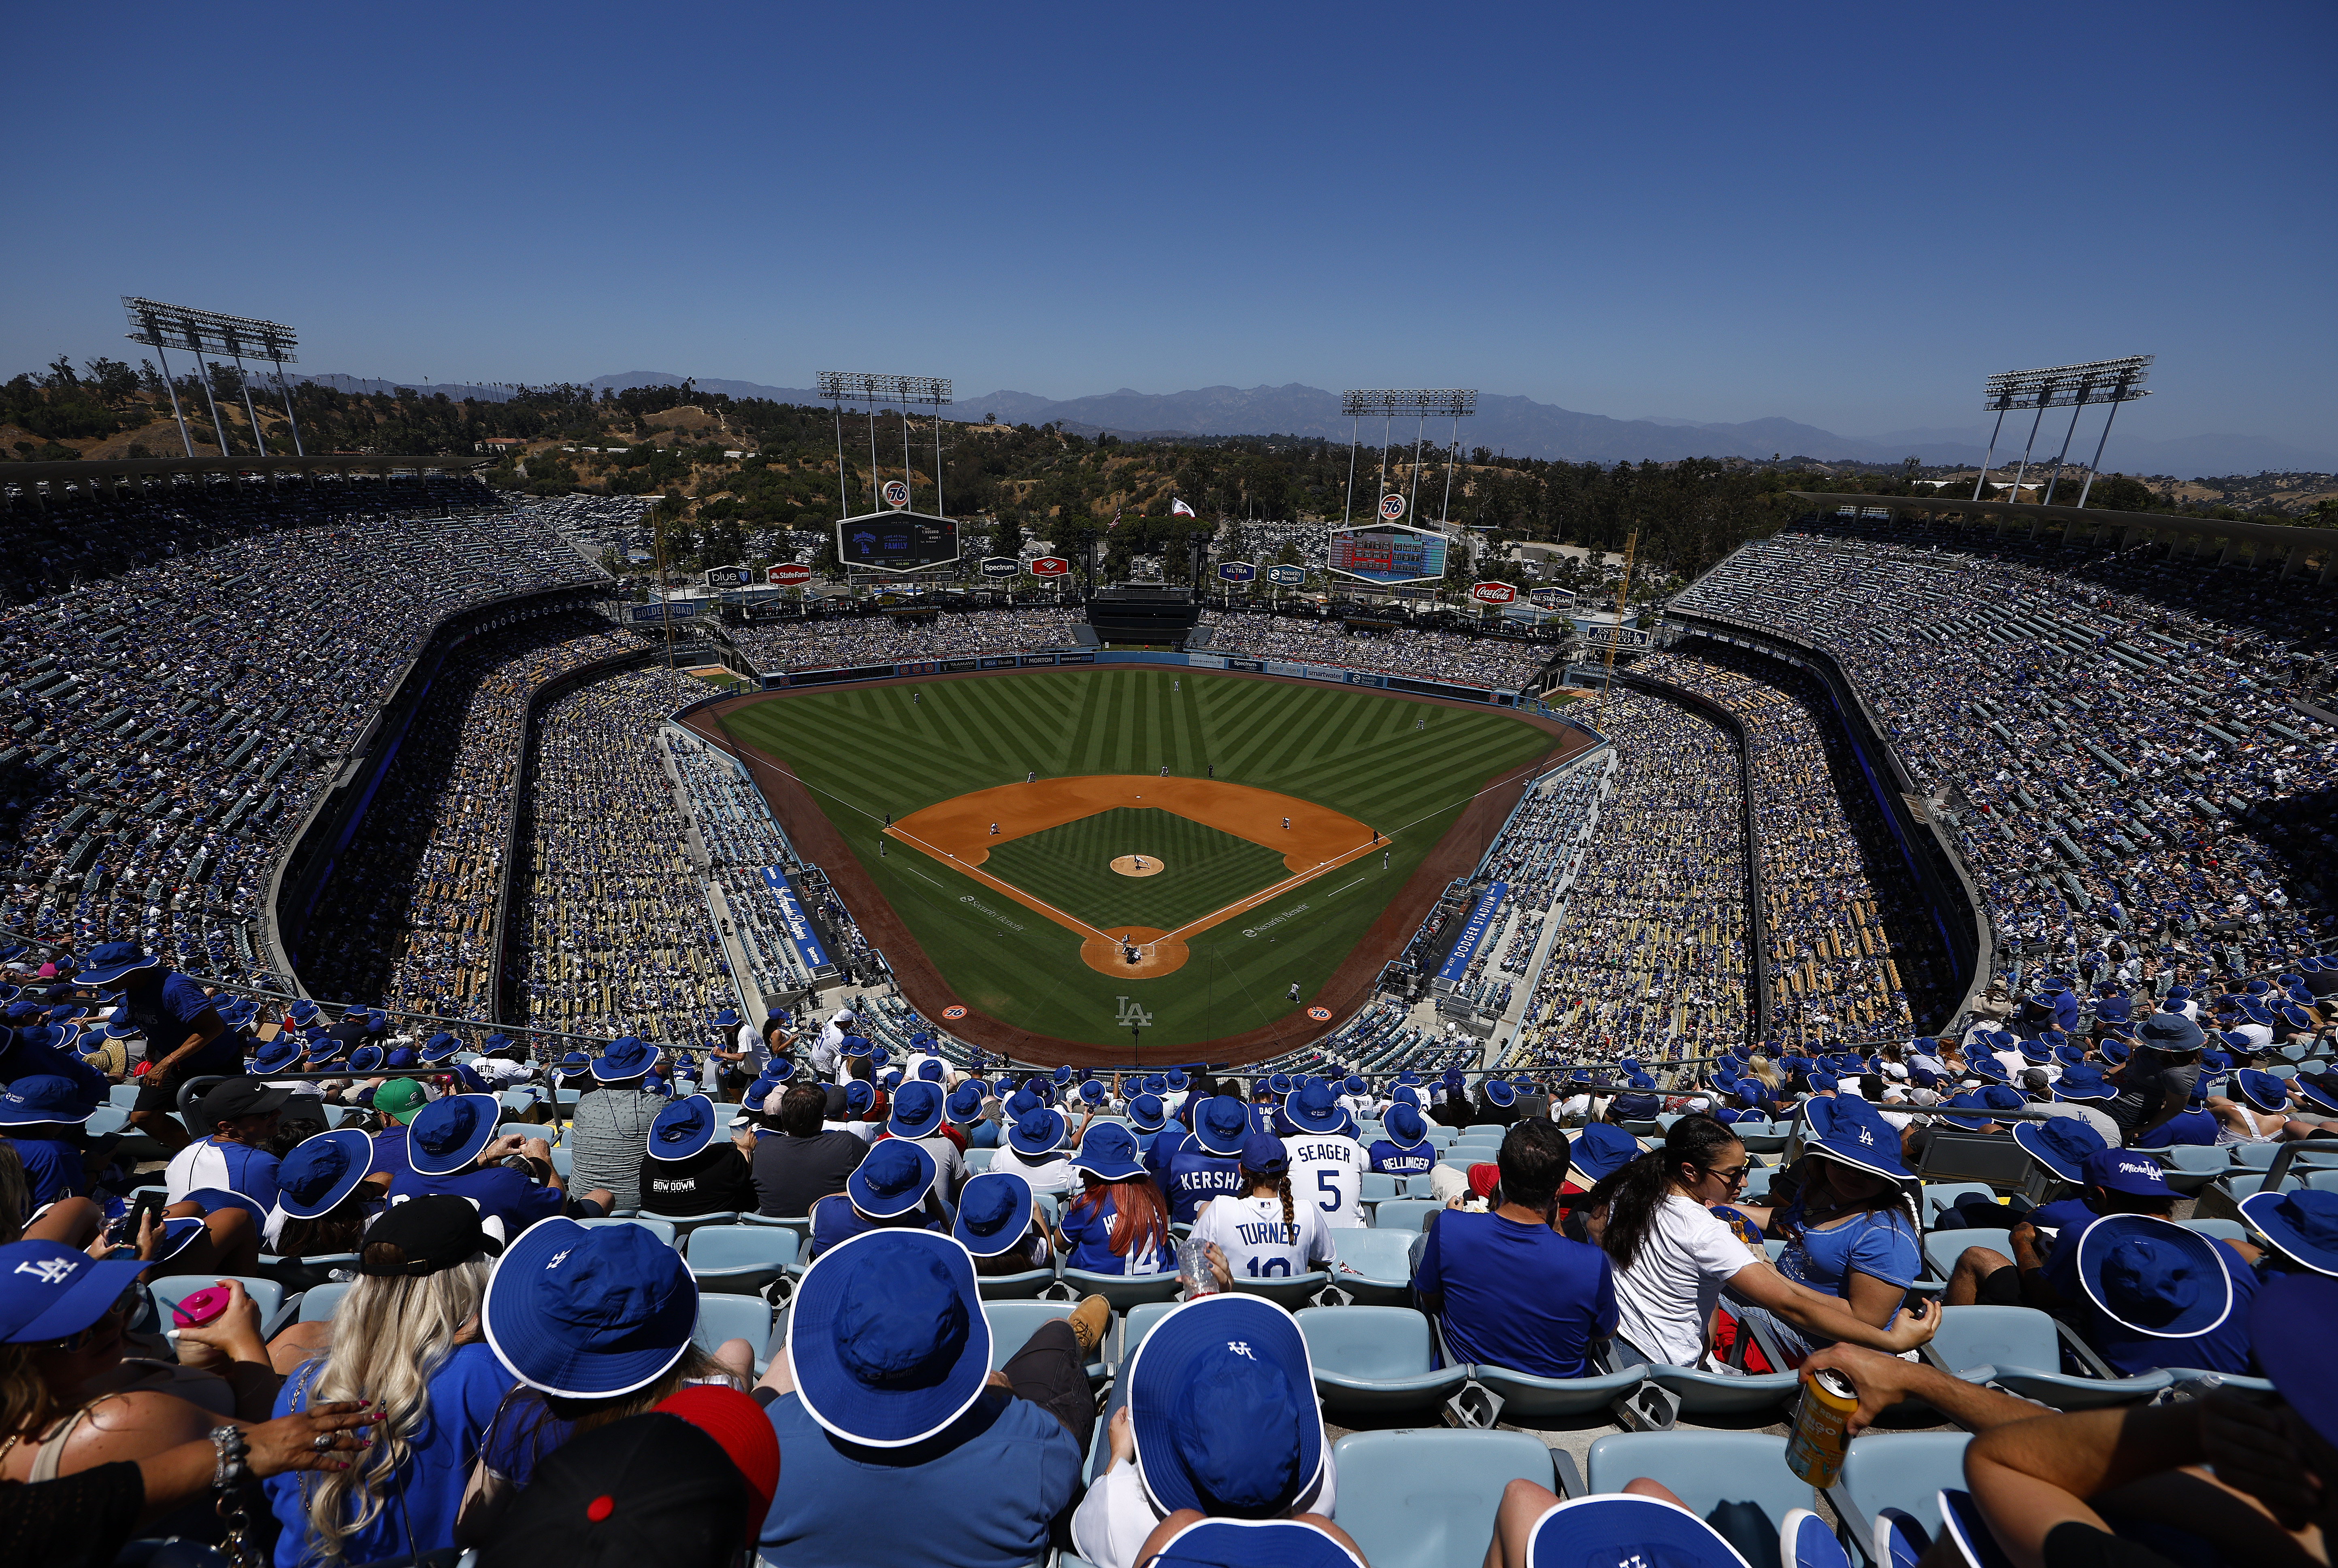 Baseball Team Says Disabled Fans Not Entitled to Best Seats in